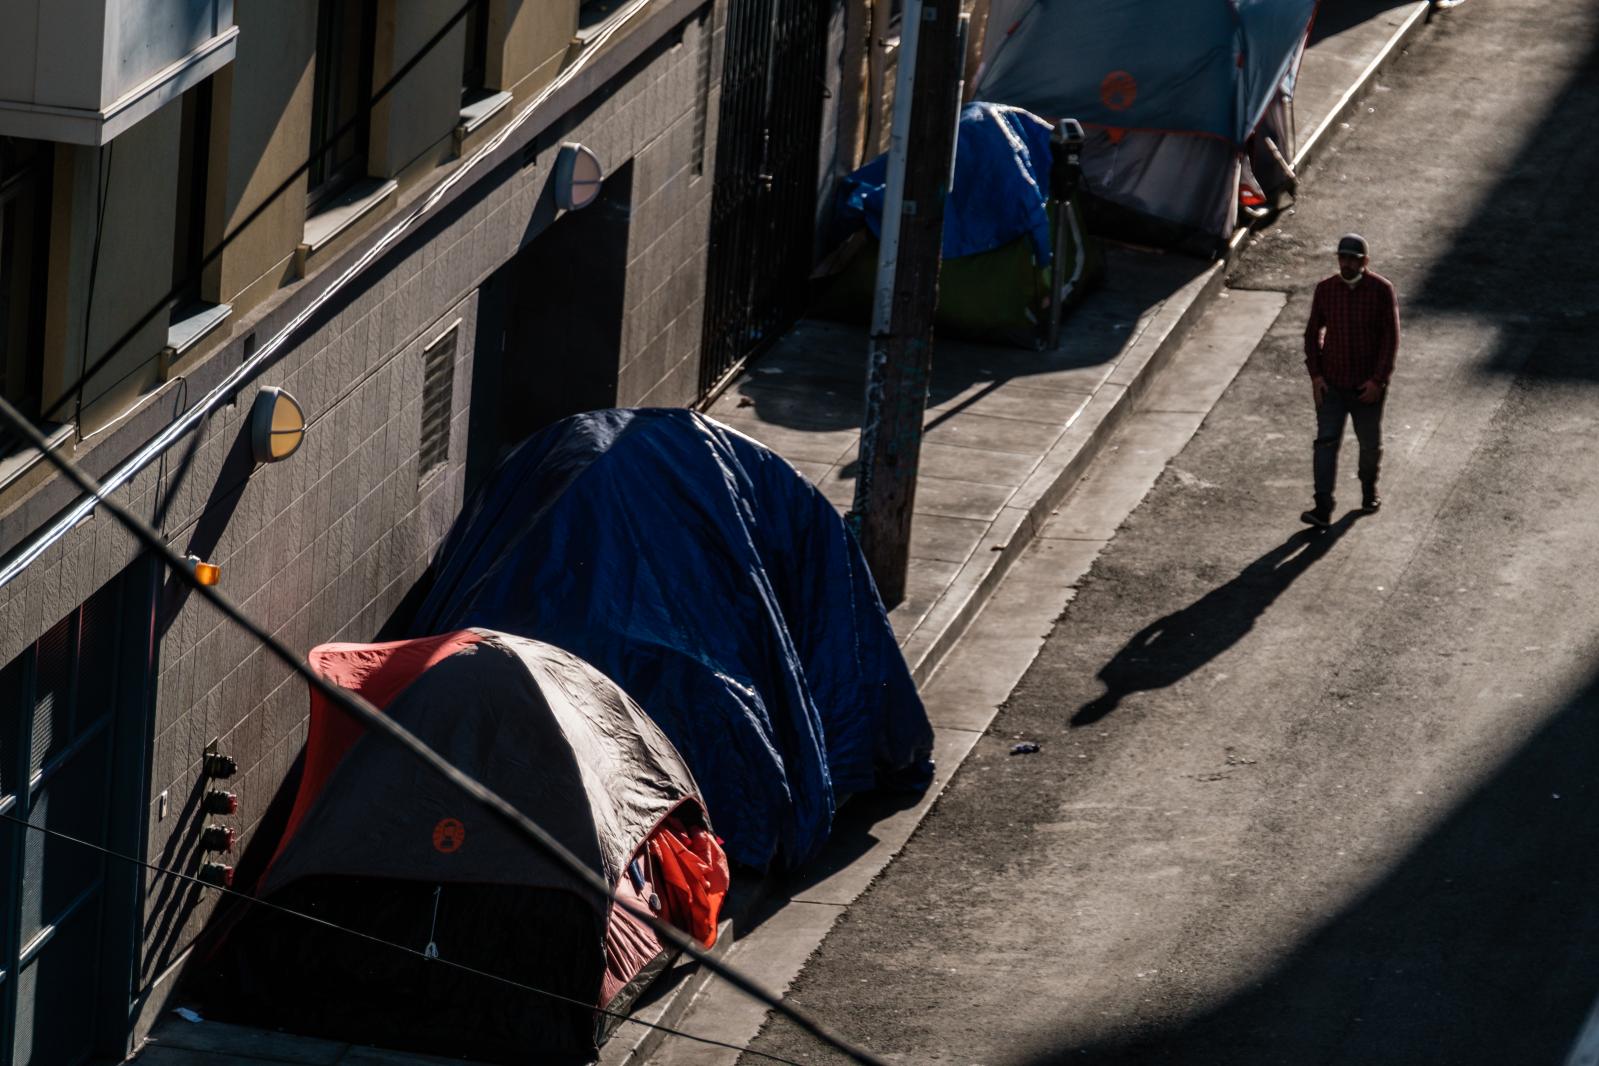 Image from San Francisco's Housing Crisis